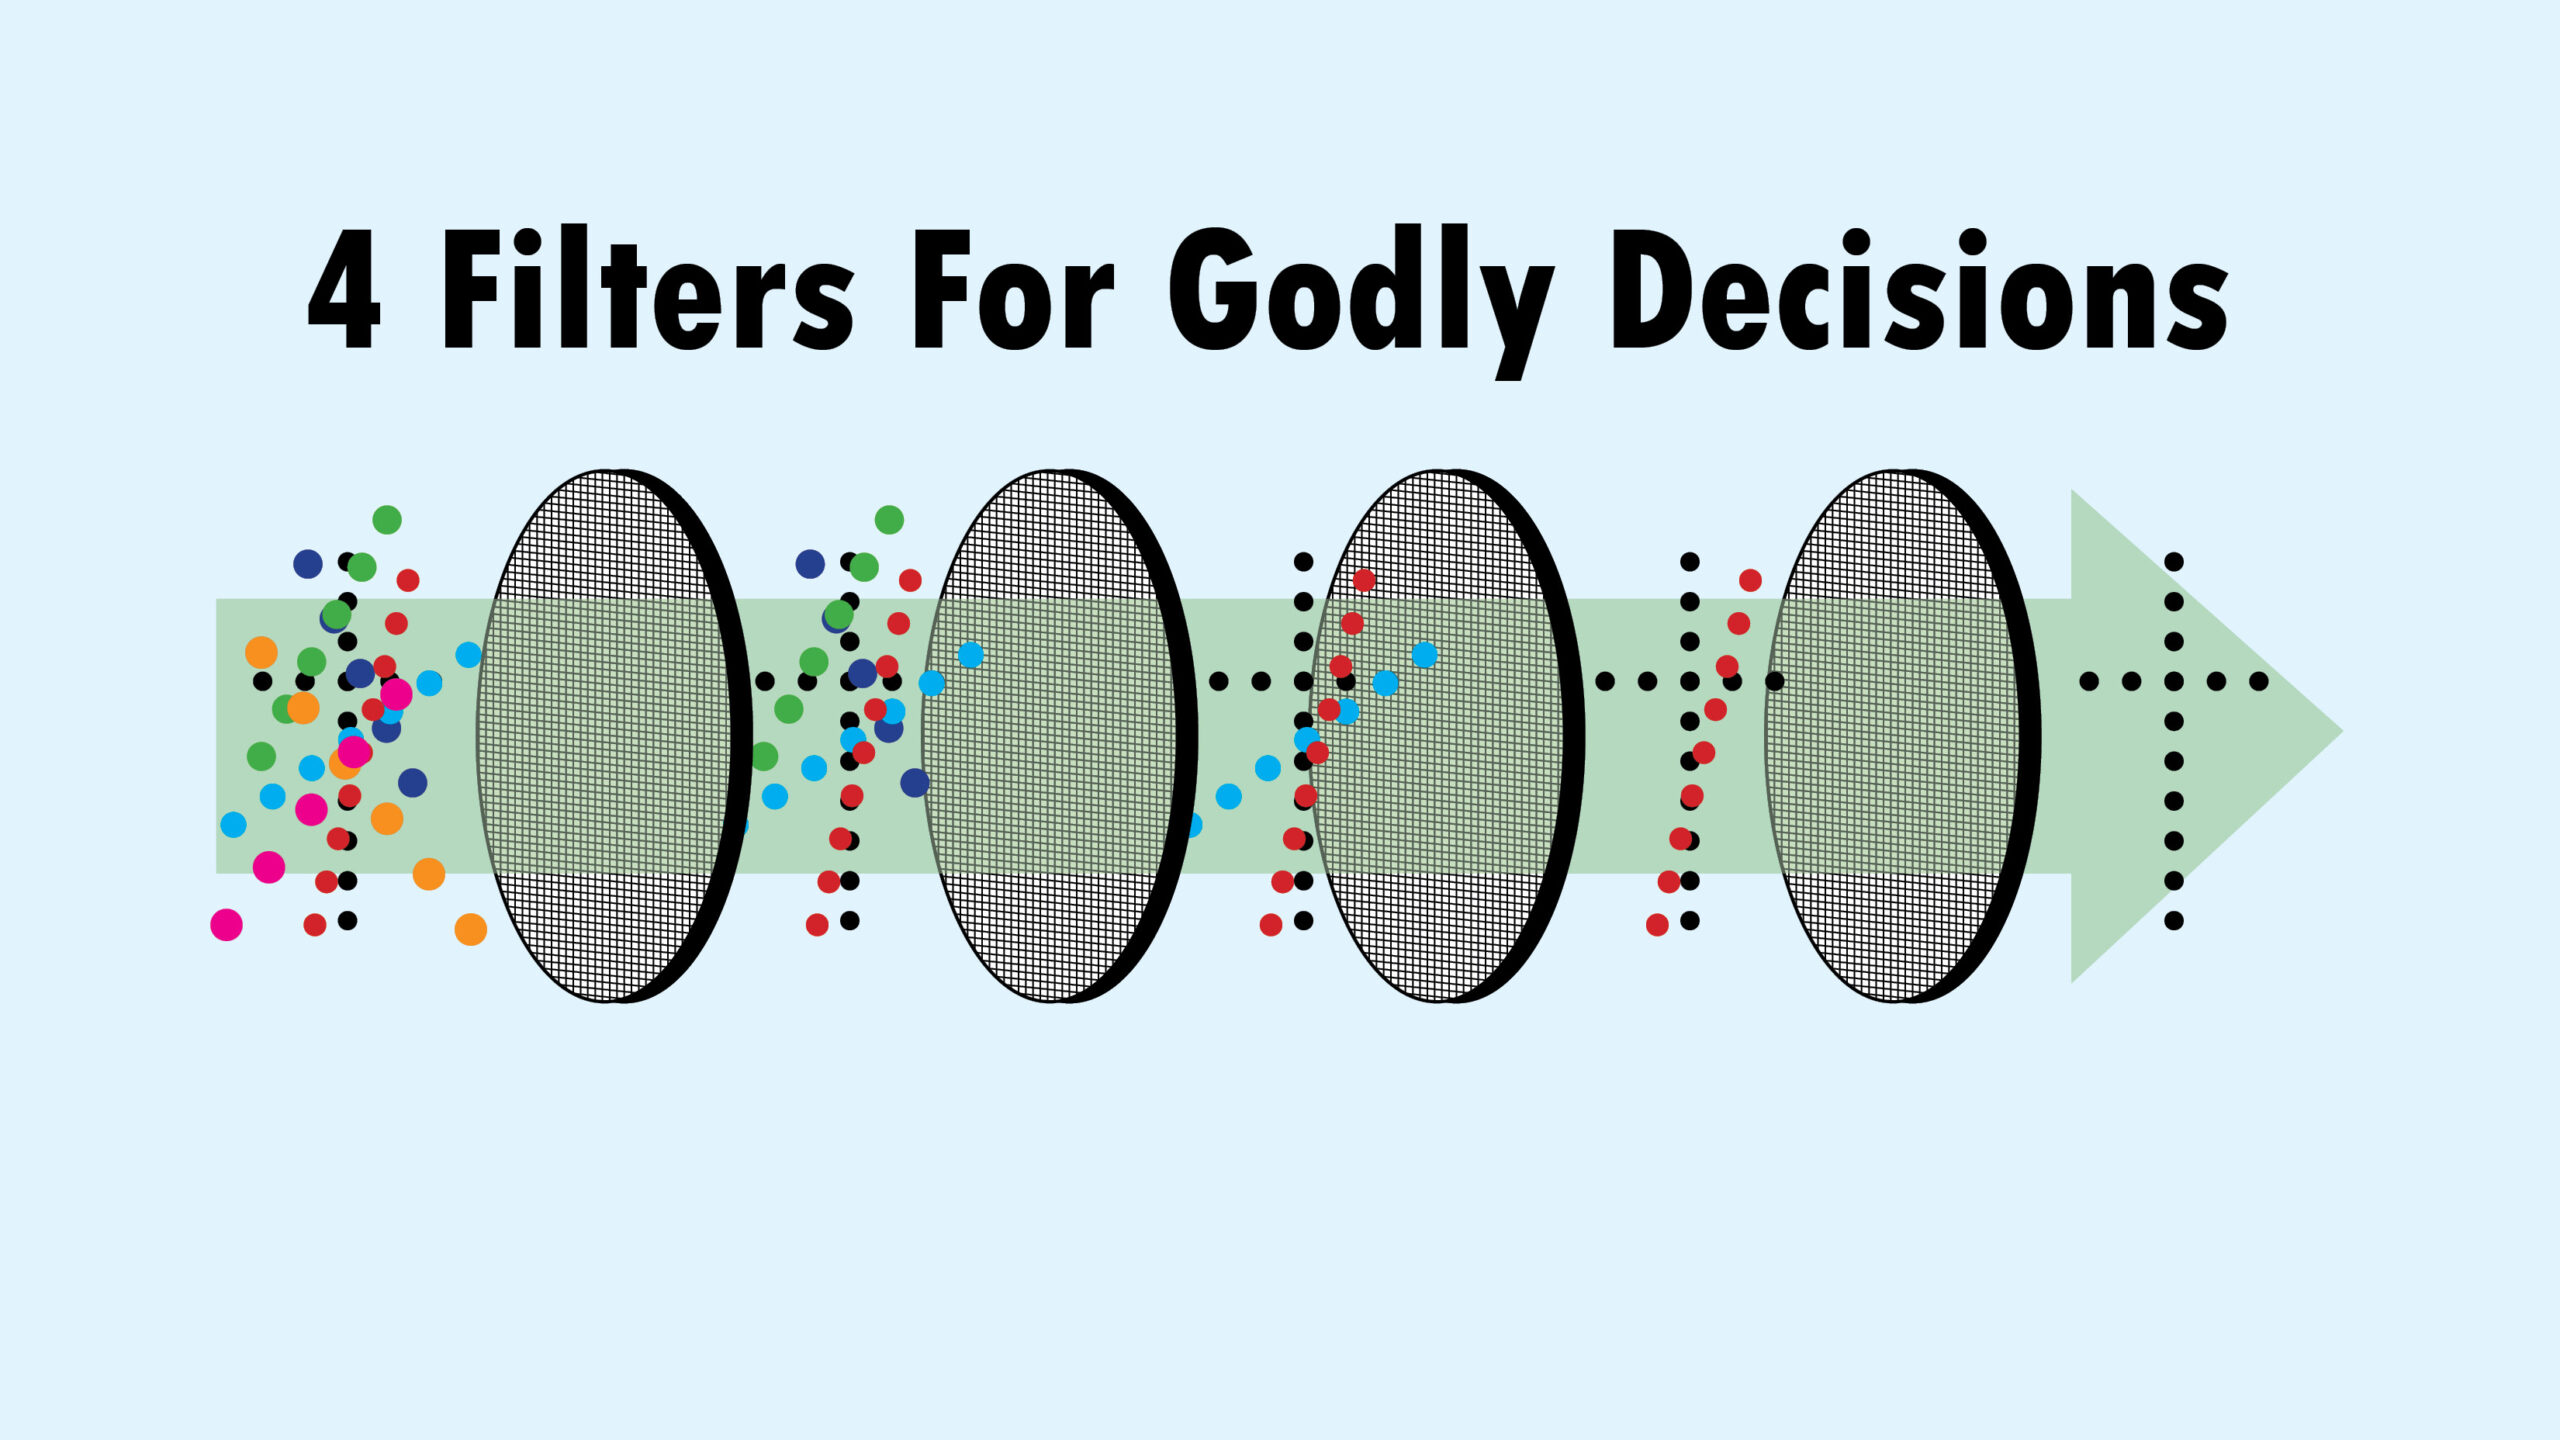 4 Filters for Godly Decisions